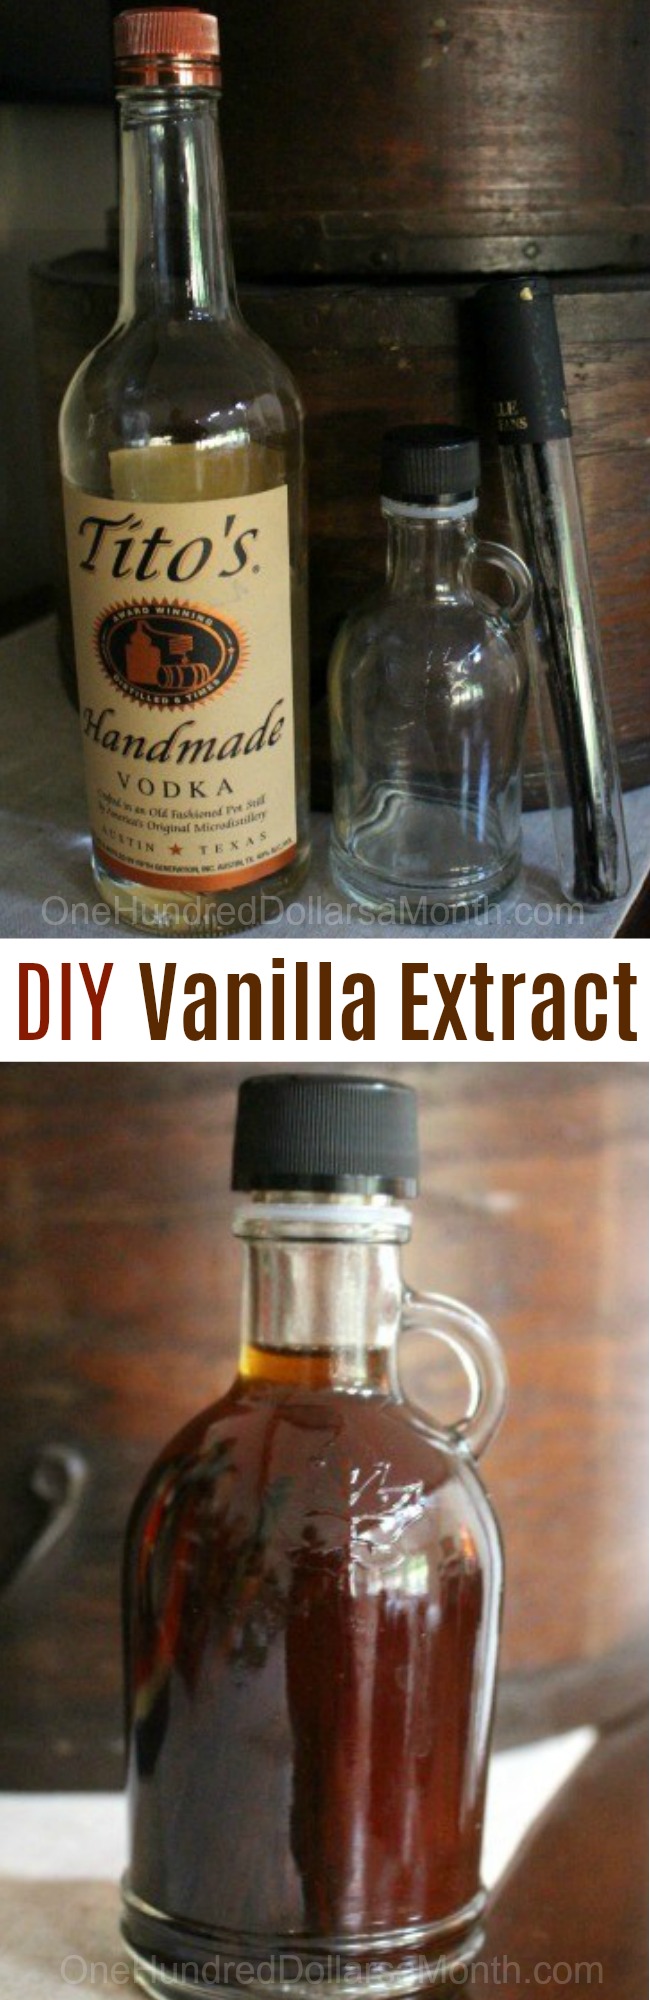 How to Make Your Own Vanilla Extract